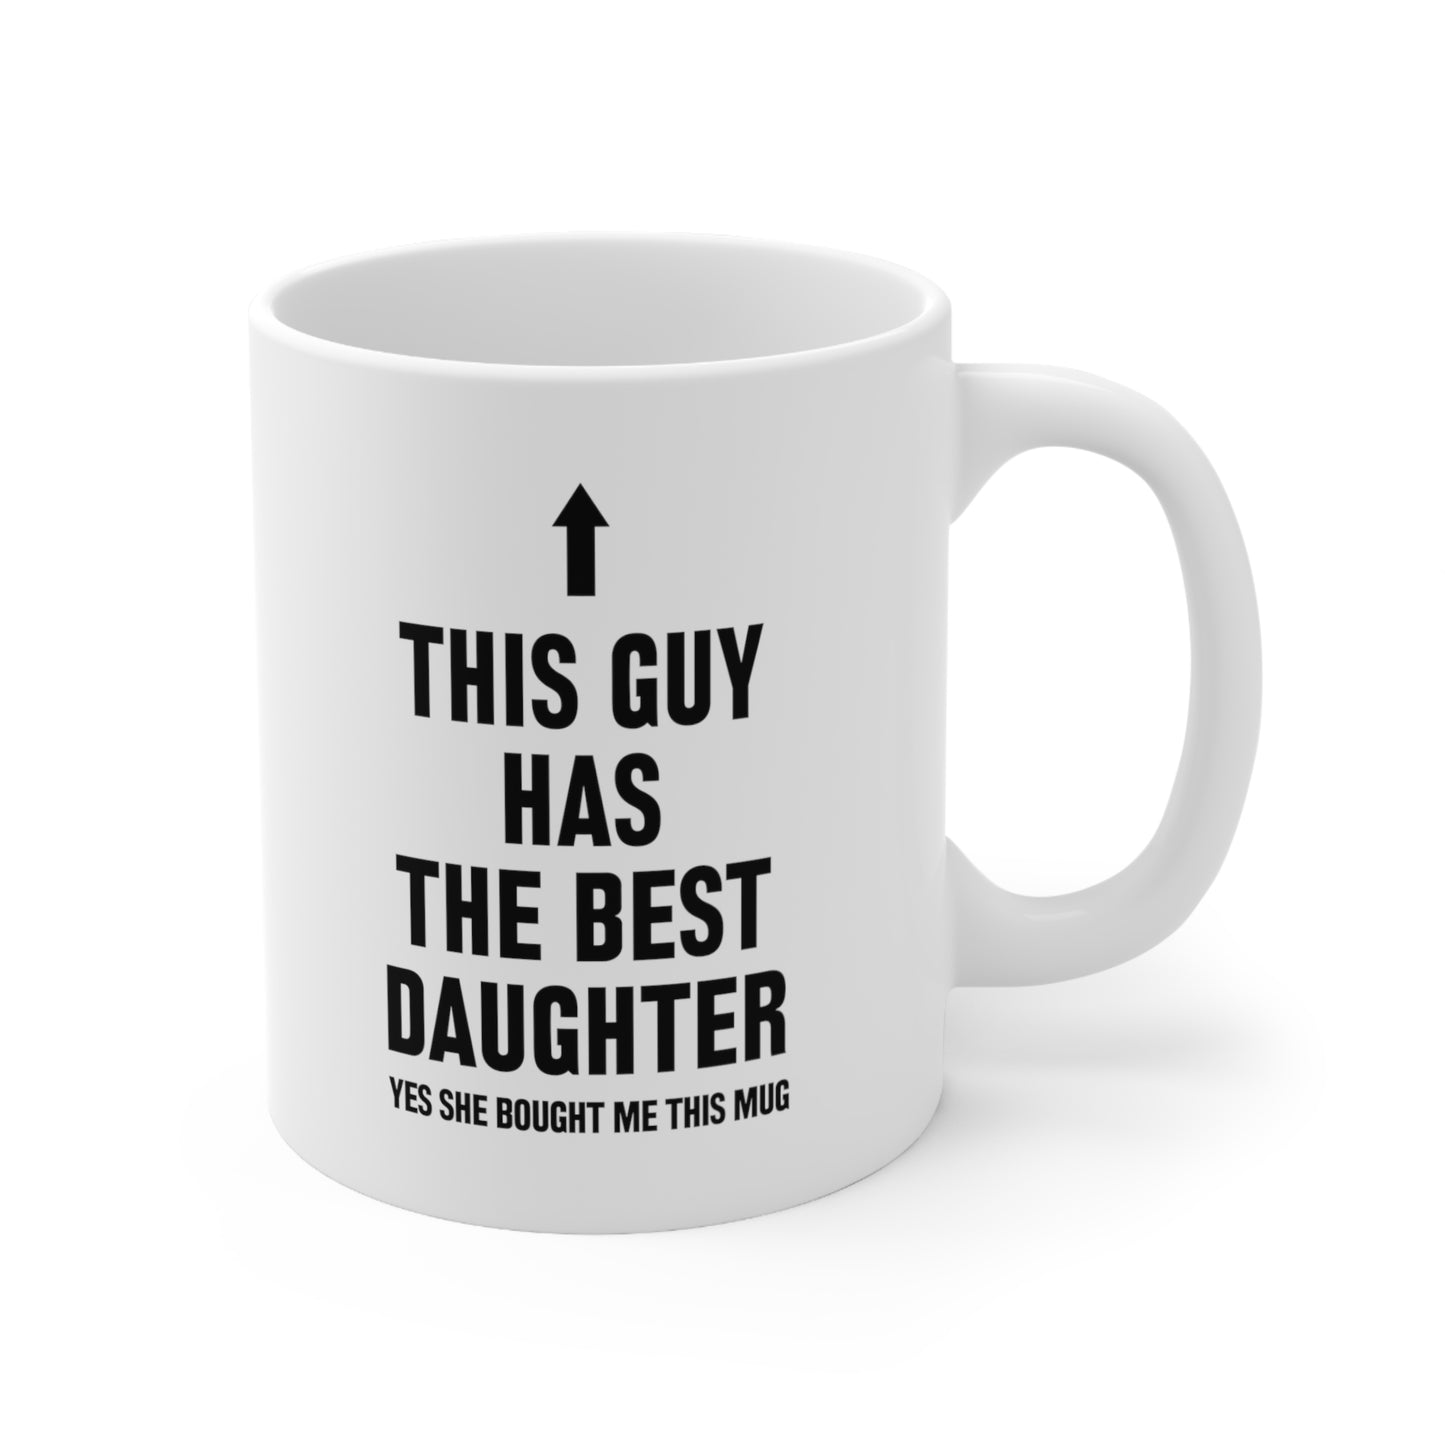 This Guy Has The Best Daughter Yes She Bought Me This Mug Coffee Cup 11oz